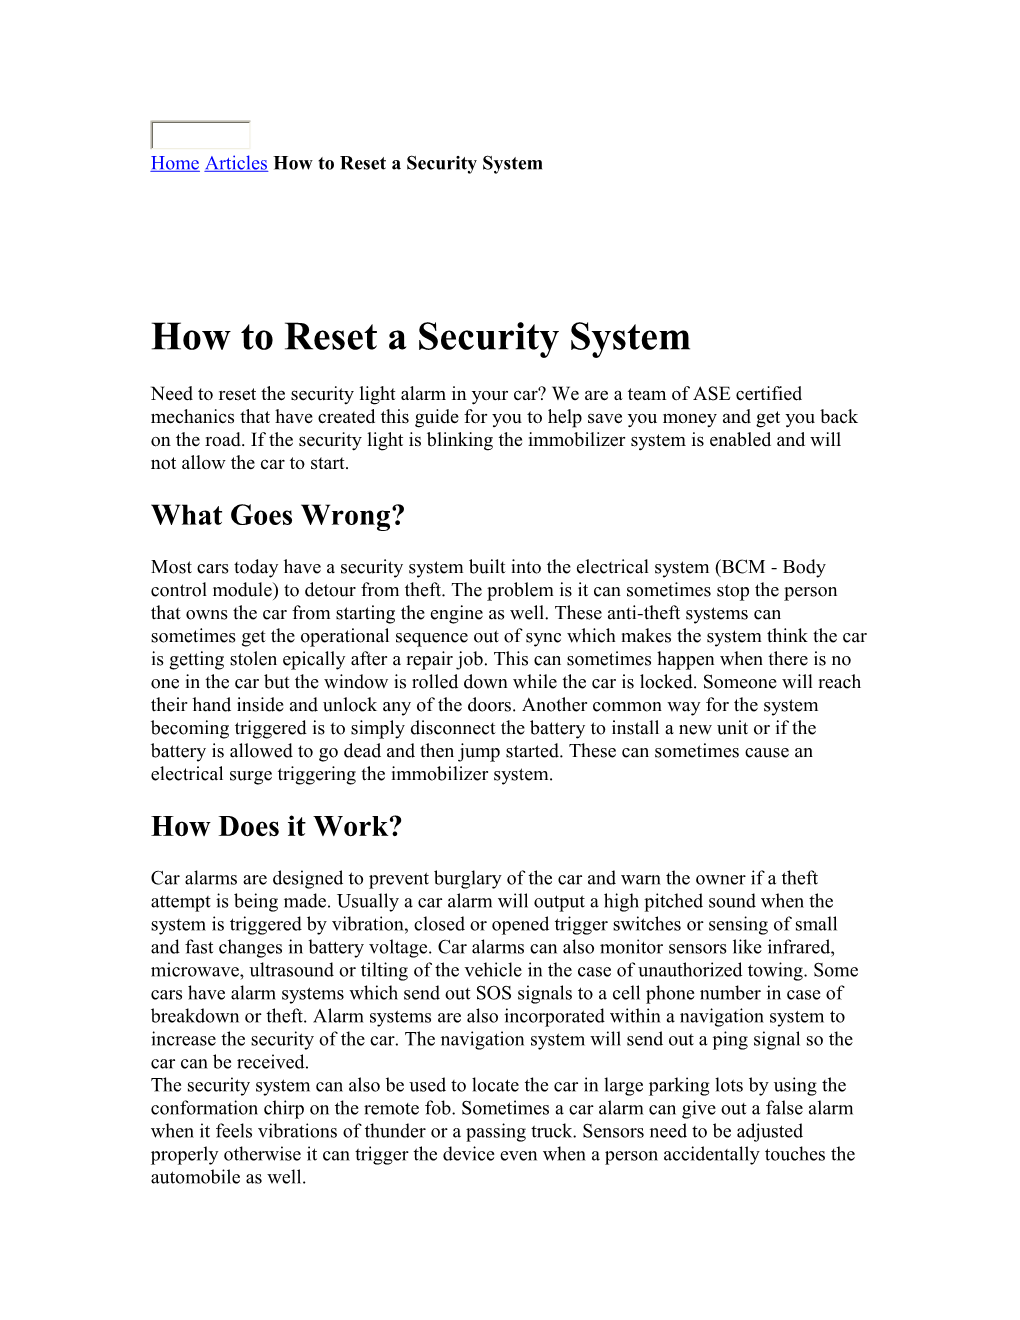 Homearticles How to Reset a Security System